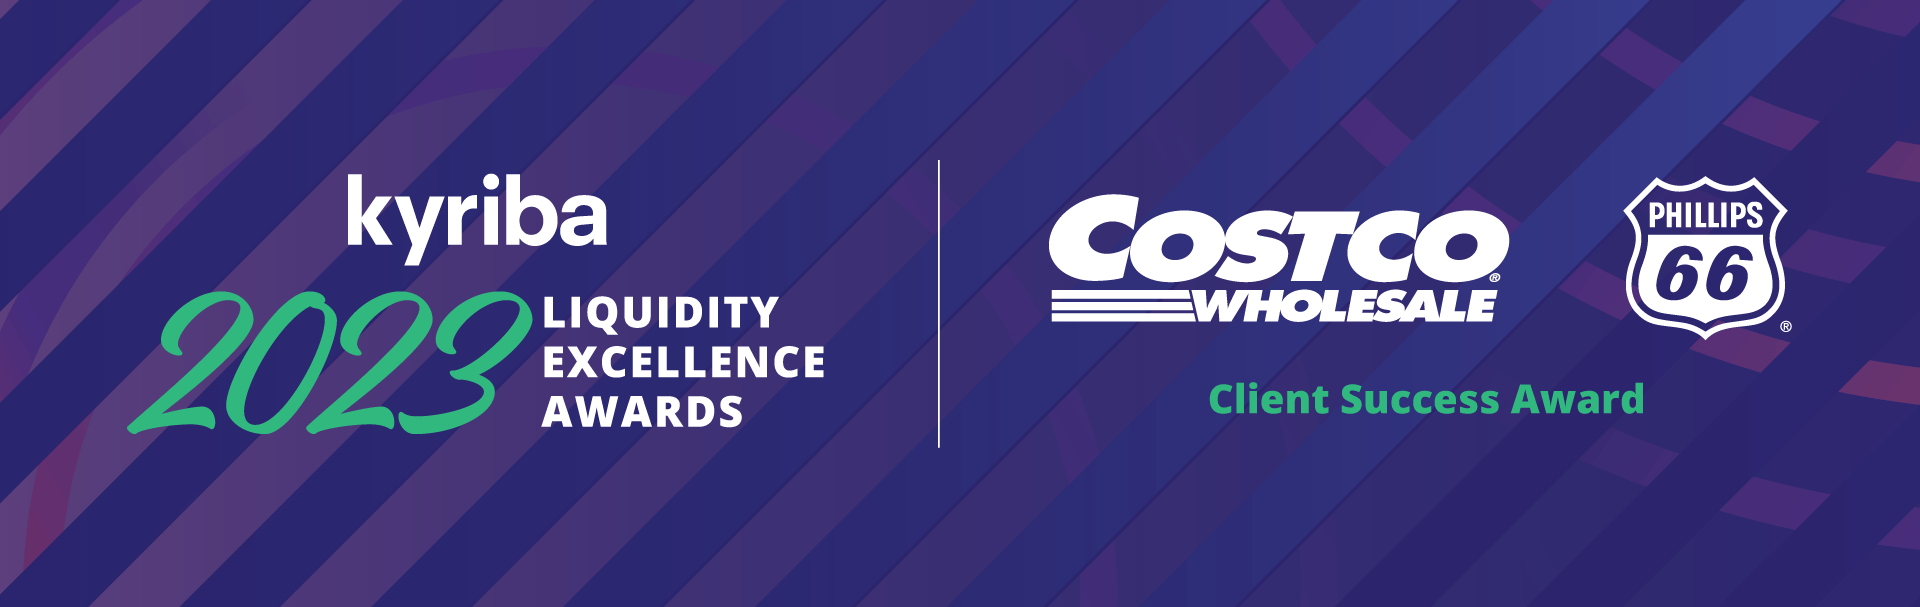 Kyriba Live 2023 Liquidity Excellence Awards with Costco Wholesale & Phillips 66